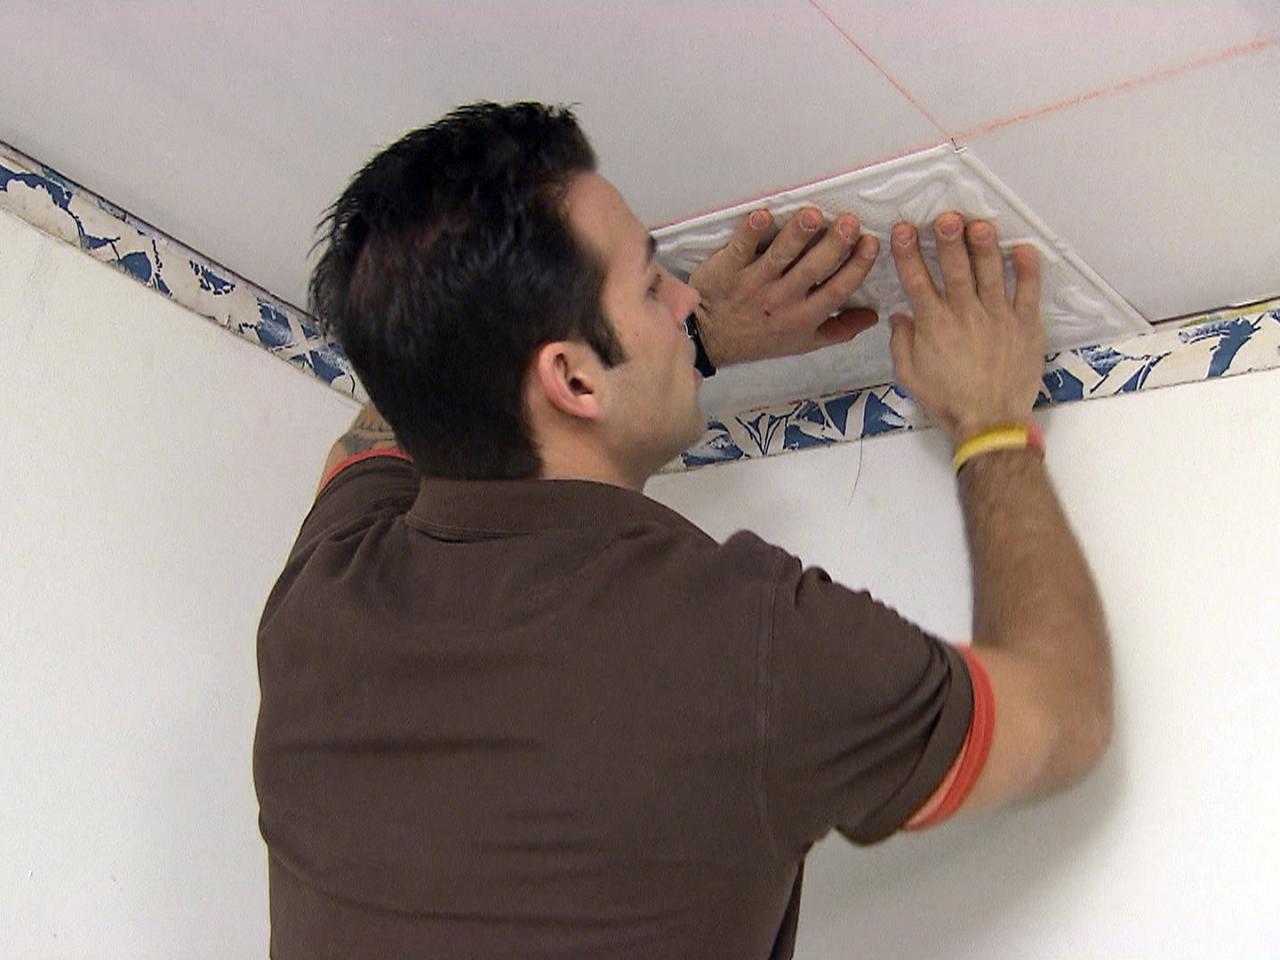 How To Install A Tin Tile Ceiling, Tin Ceiling Tiles Installation